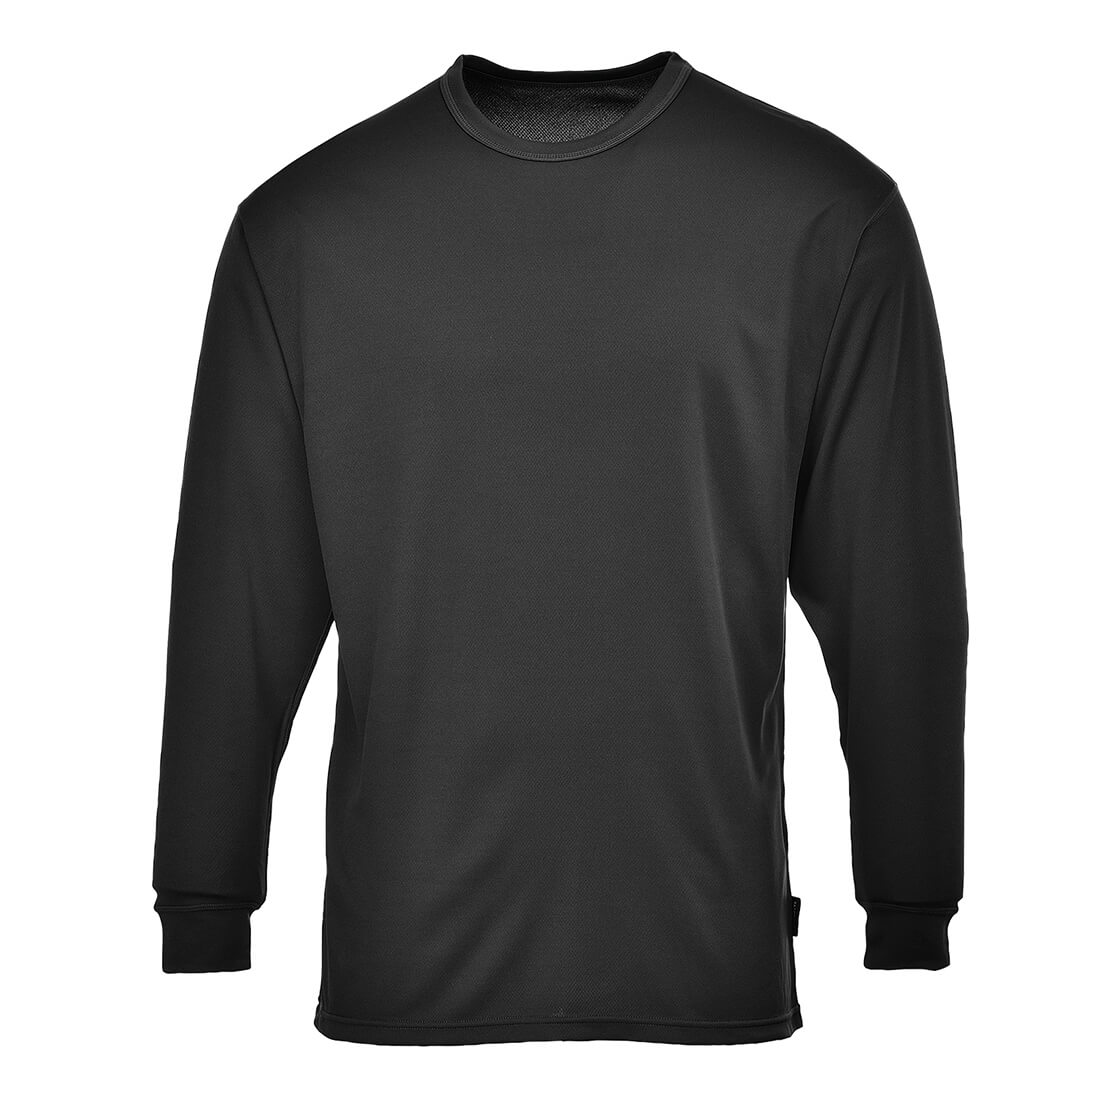 Photo of Base Layer Thermal Top Long Sleeve Black Xl